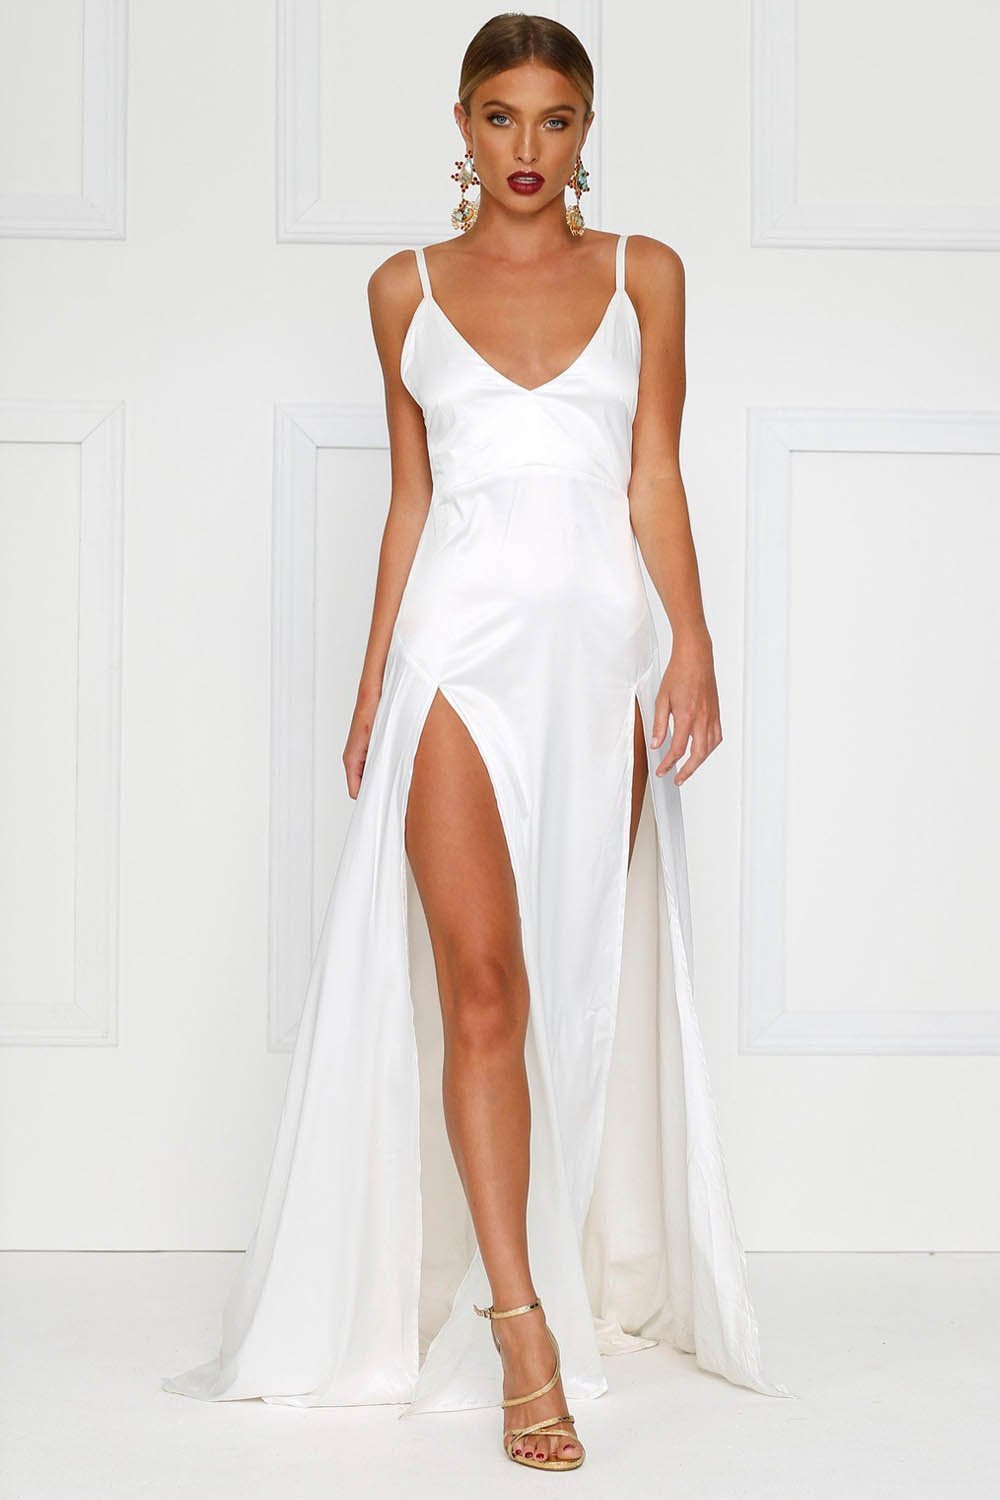 White Sexy Long Satin Prom Dress with Two Flirty Side Thigh-High Splits